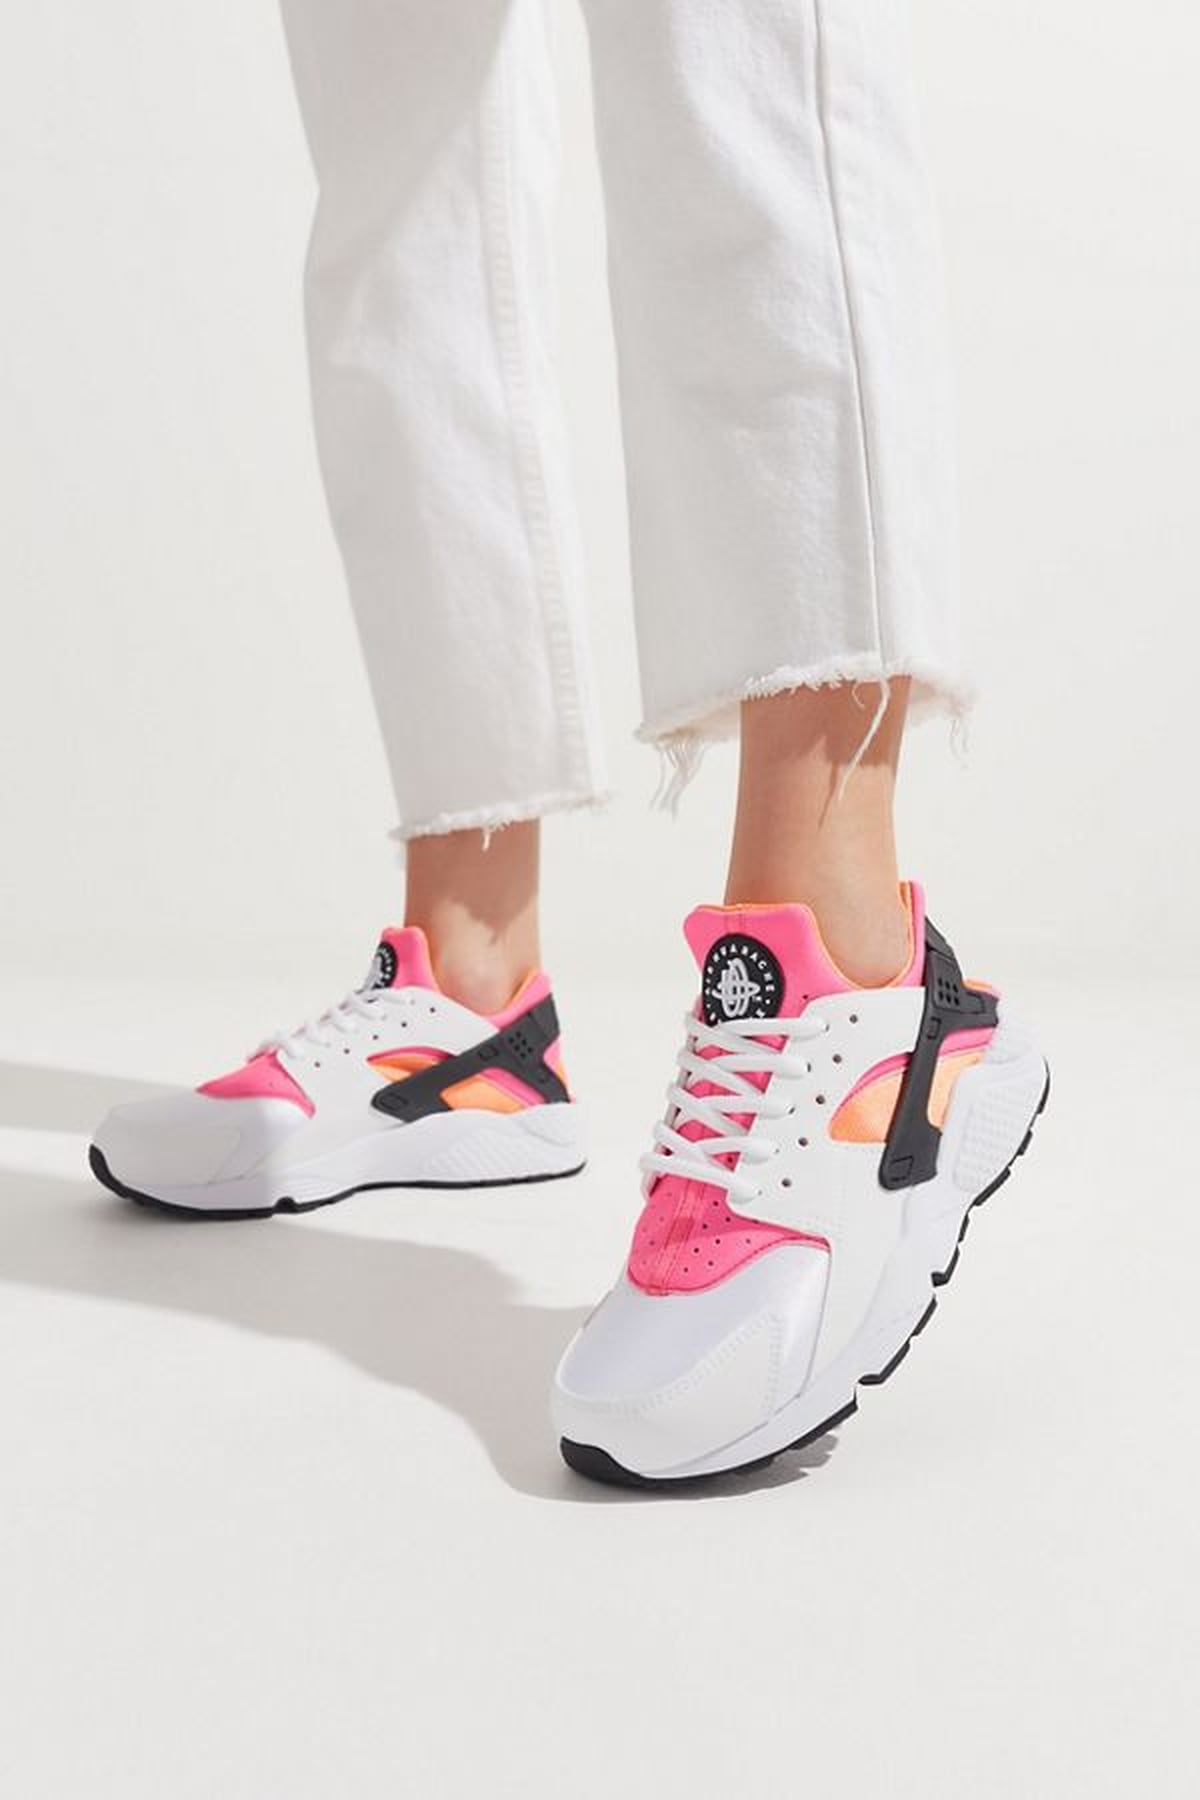 Best Sneakers From Urban Outfitters | POPSUGAR Fashion